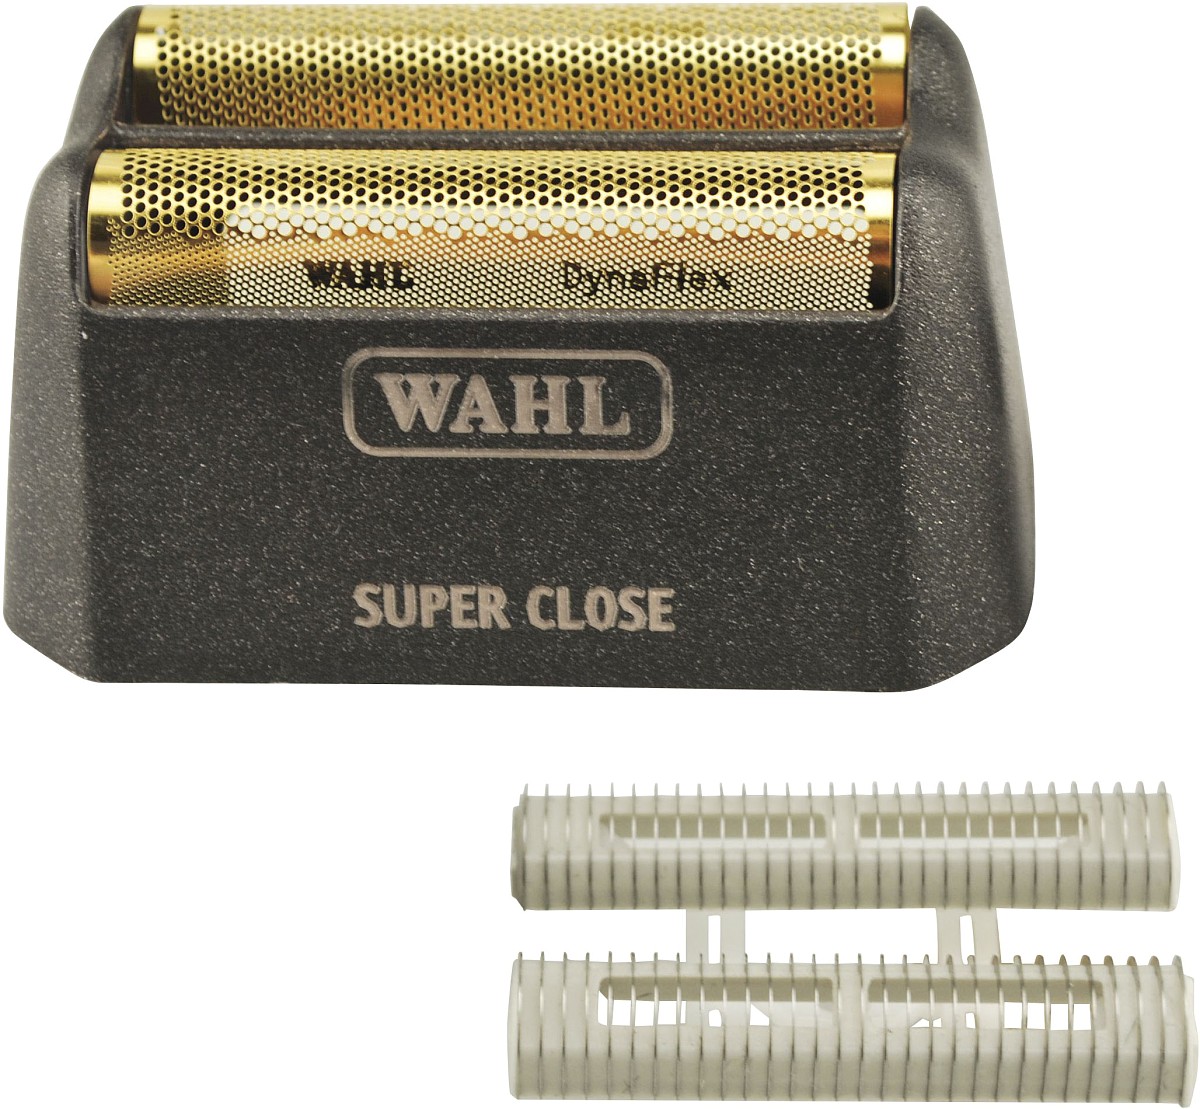  Wahl Professional Finale Foil and replacement Cutter 